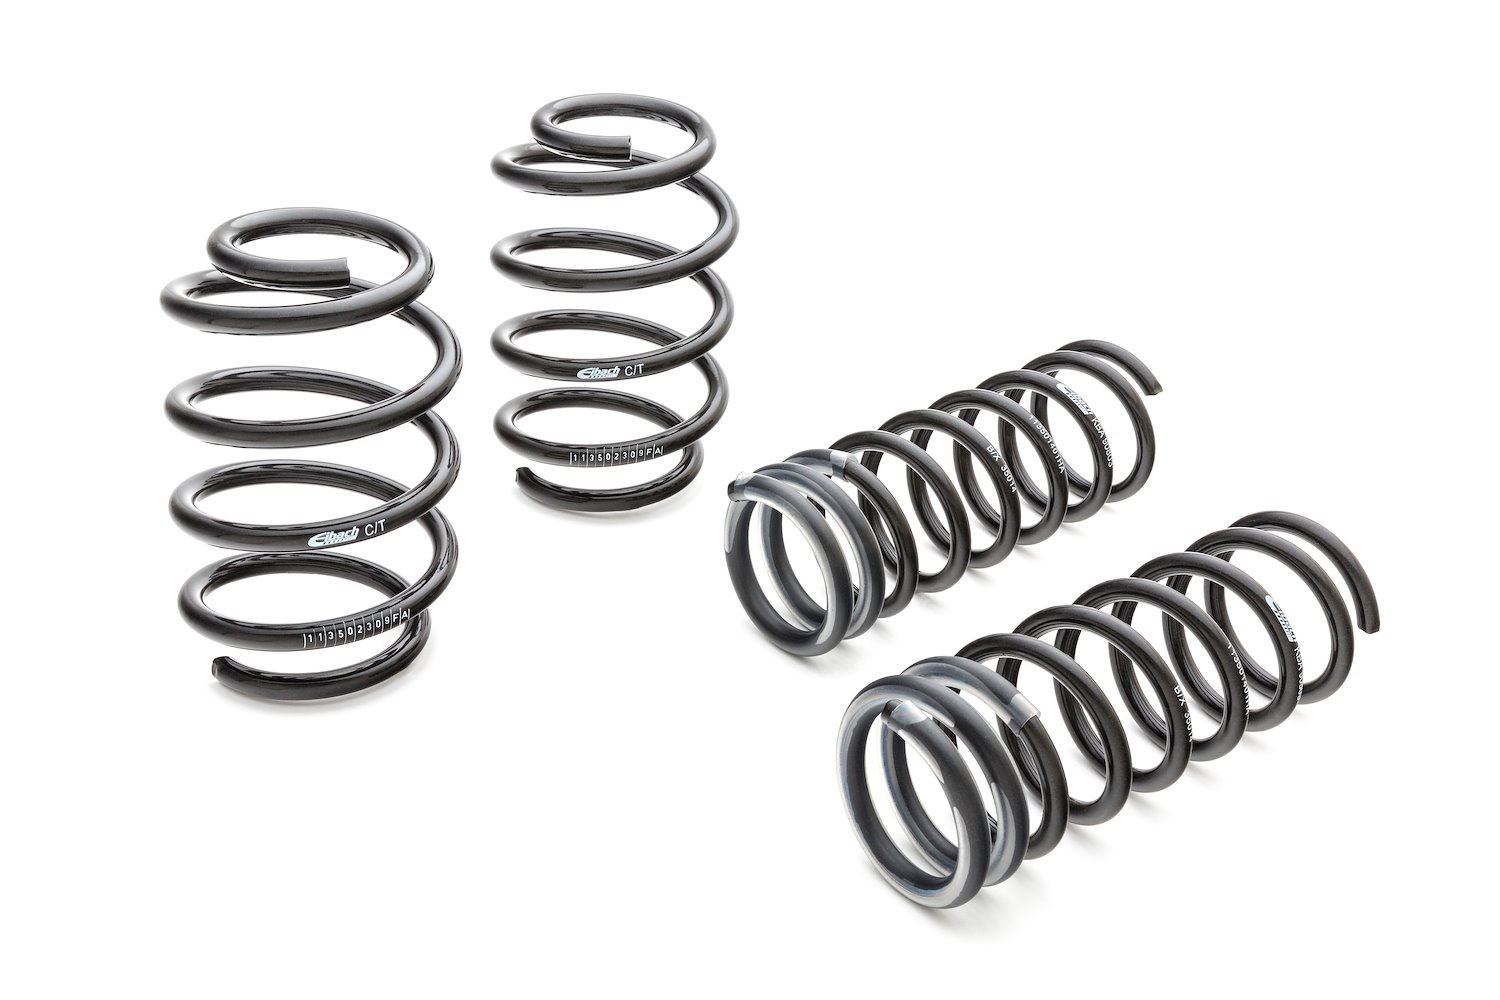 E10-40-036-01-22 Pro-Kit Lowering Springs for 2016-2017 Honda Civic - .700 in. Front/1 in. Rear Drop